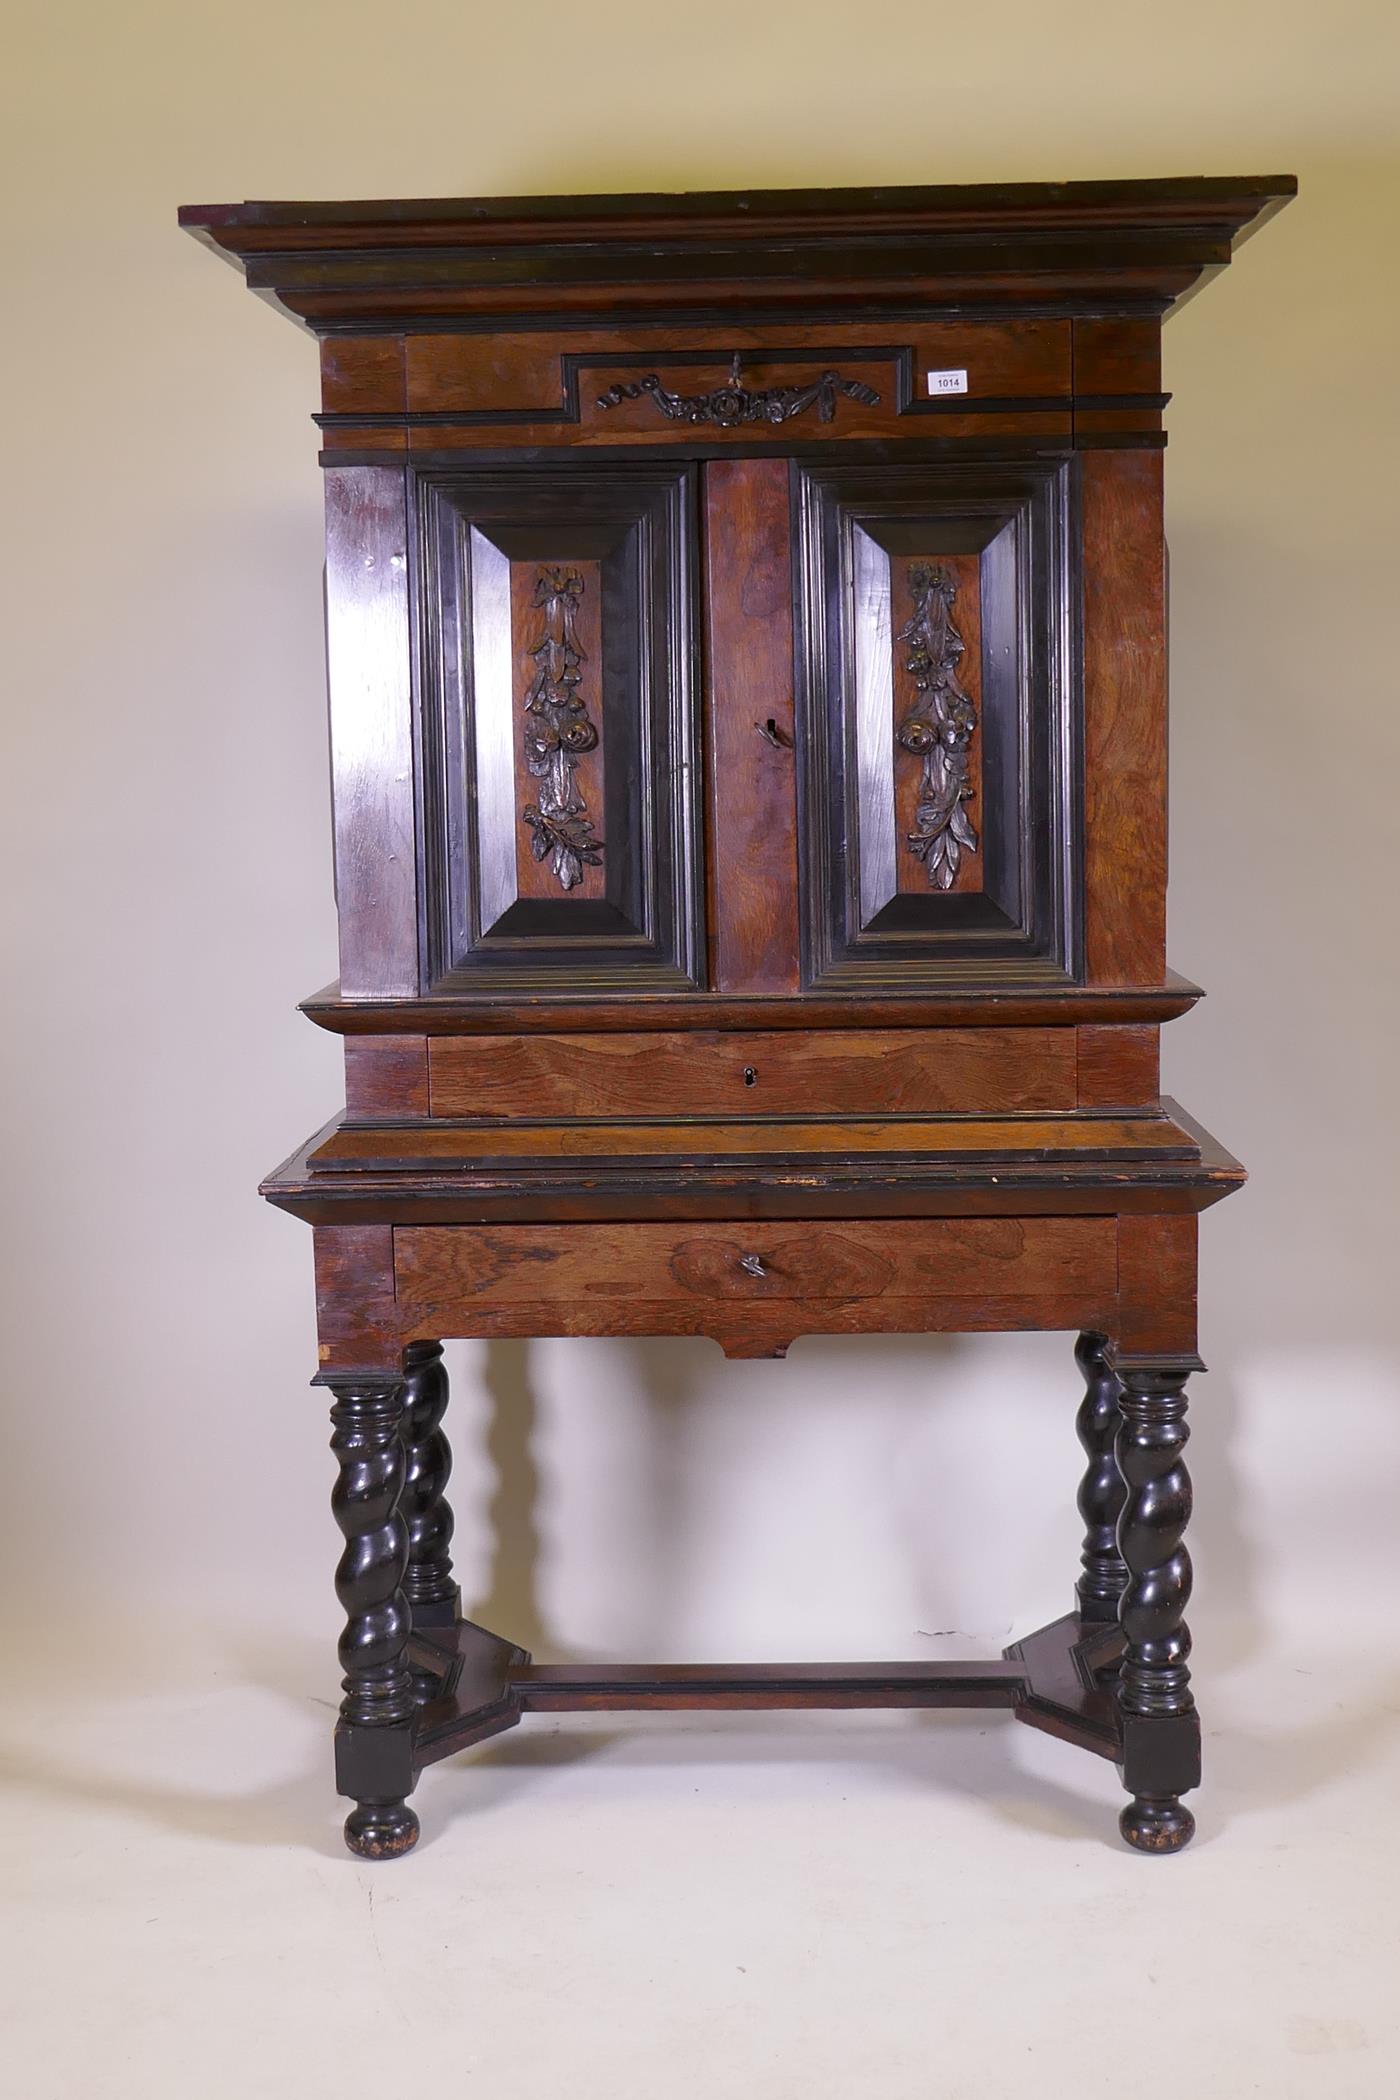 A C19th Continental rosewood cabinet on stand, with carved and ebonised detail, the upper section